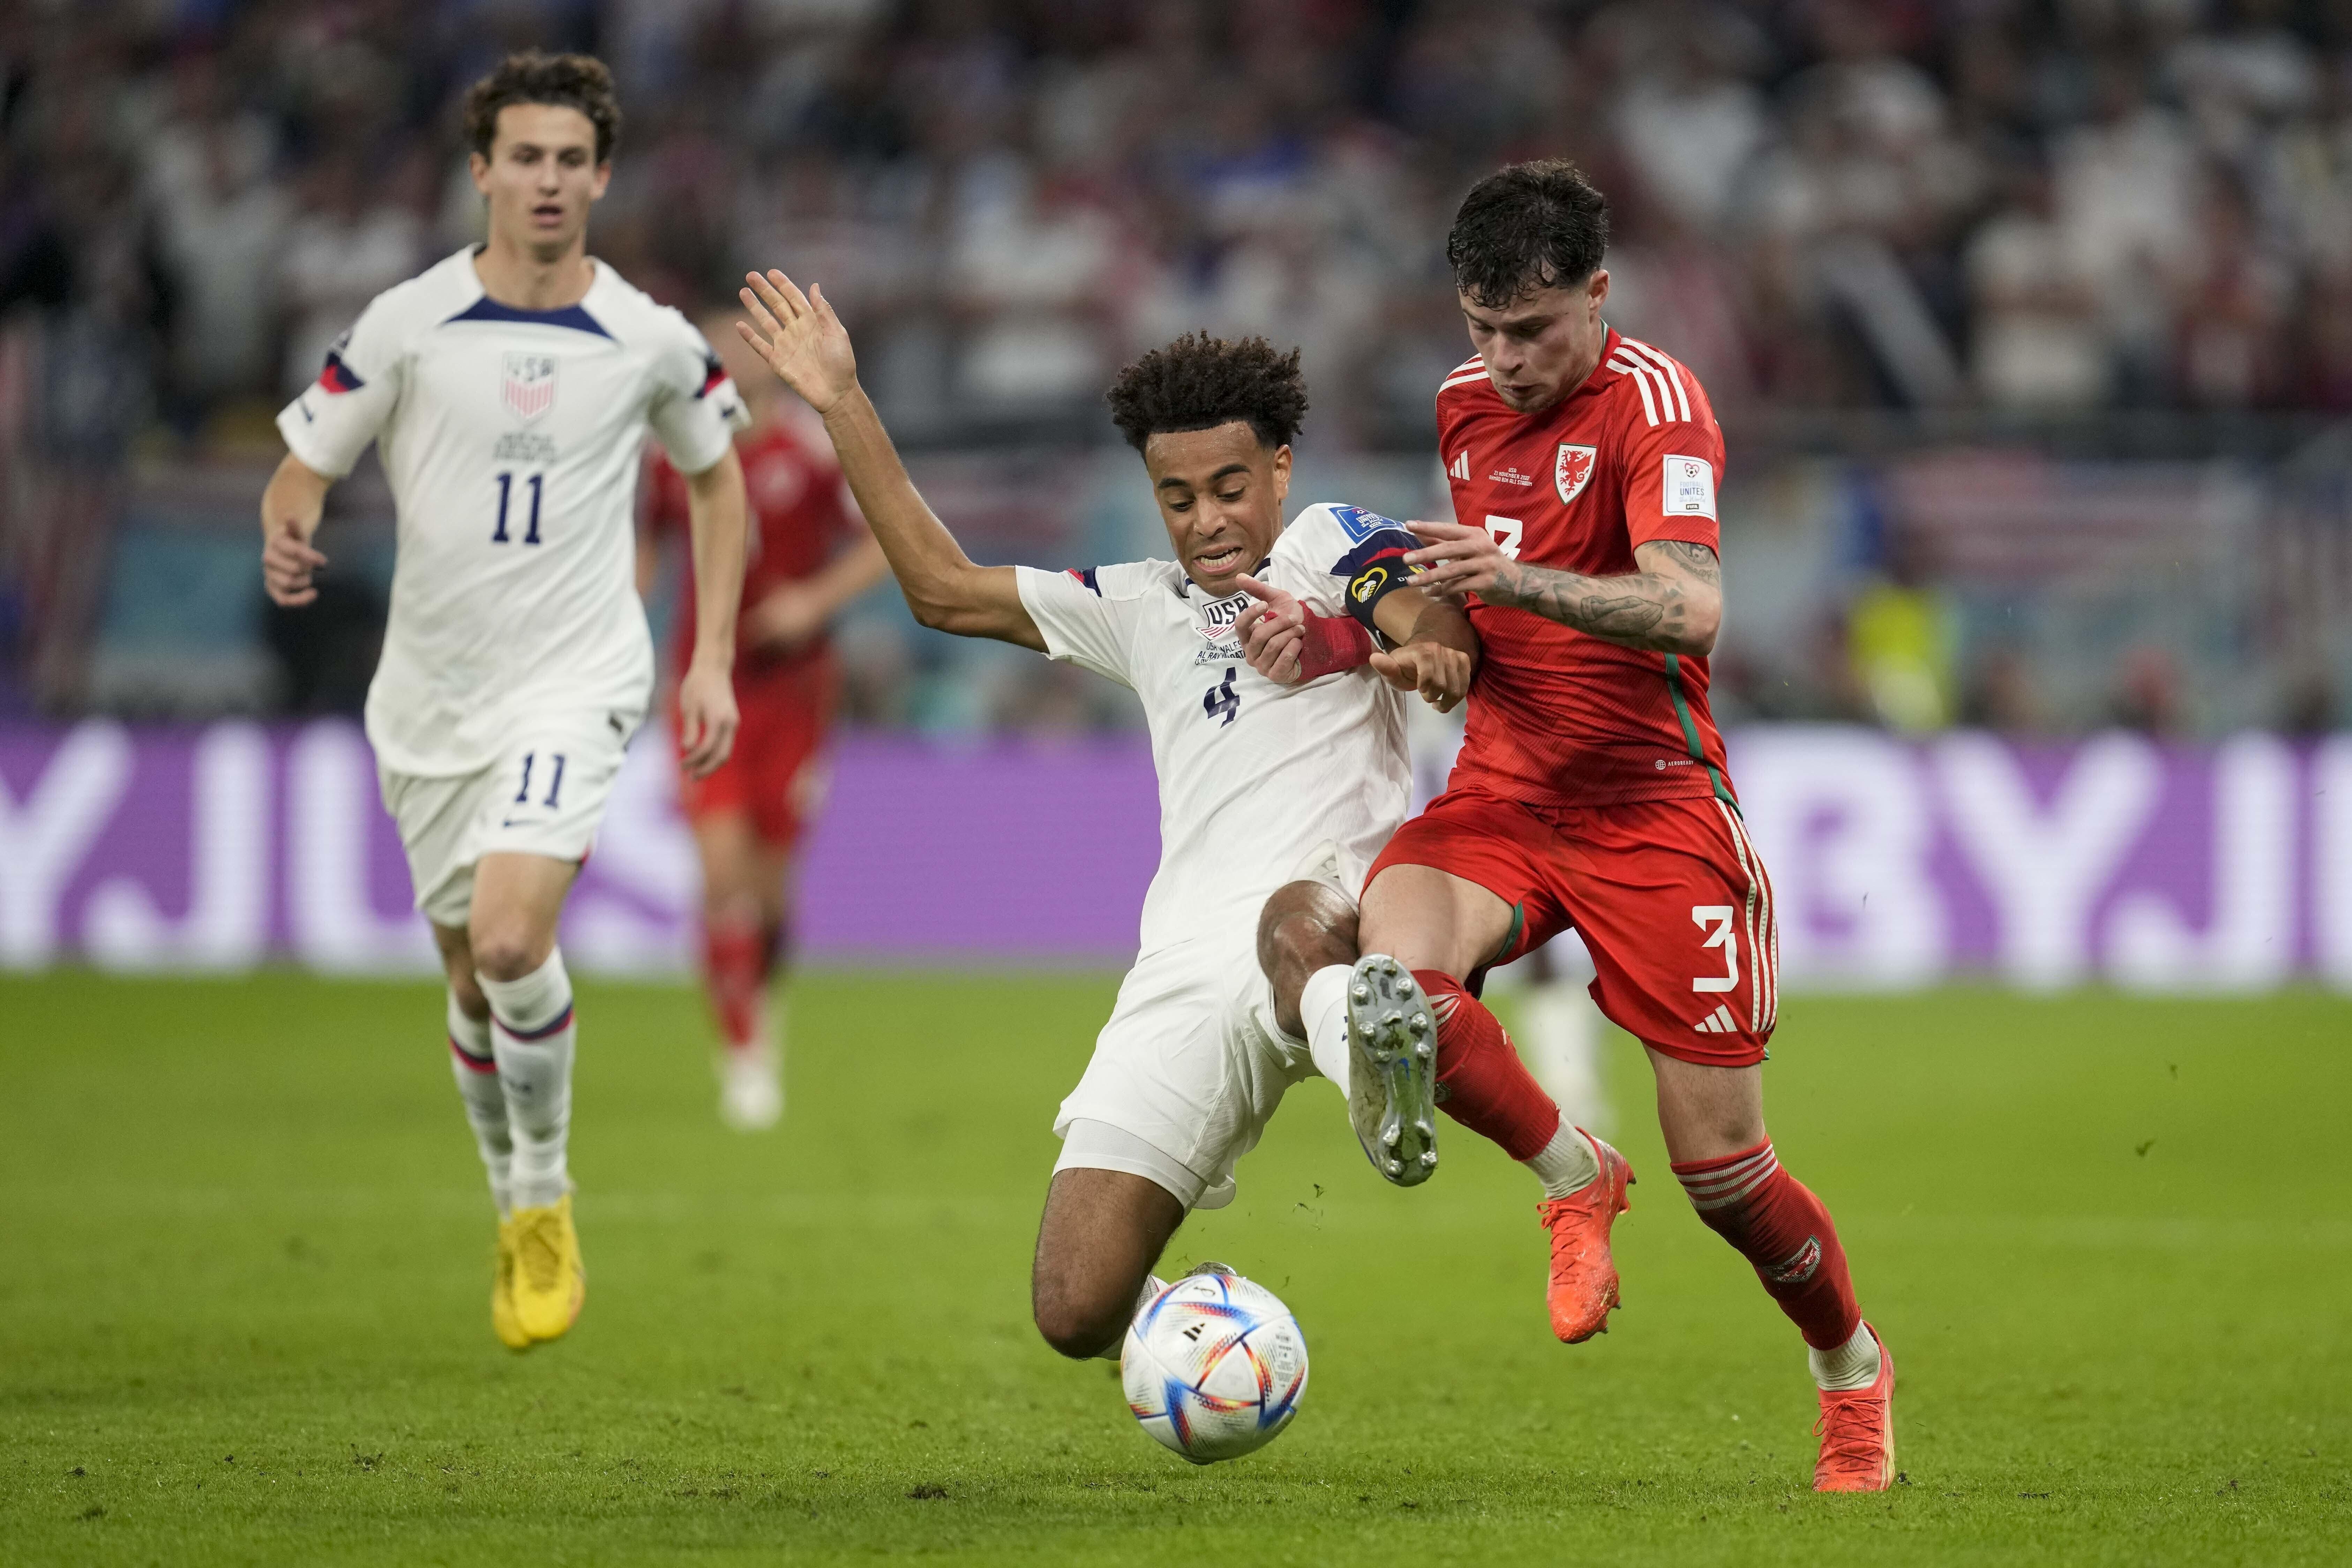 Tyler Adams voted top U.S. men's soccer player for 2022 - Washington Times